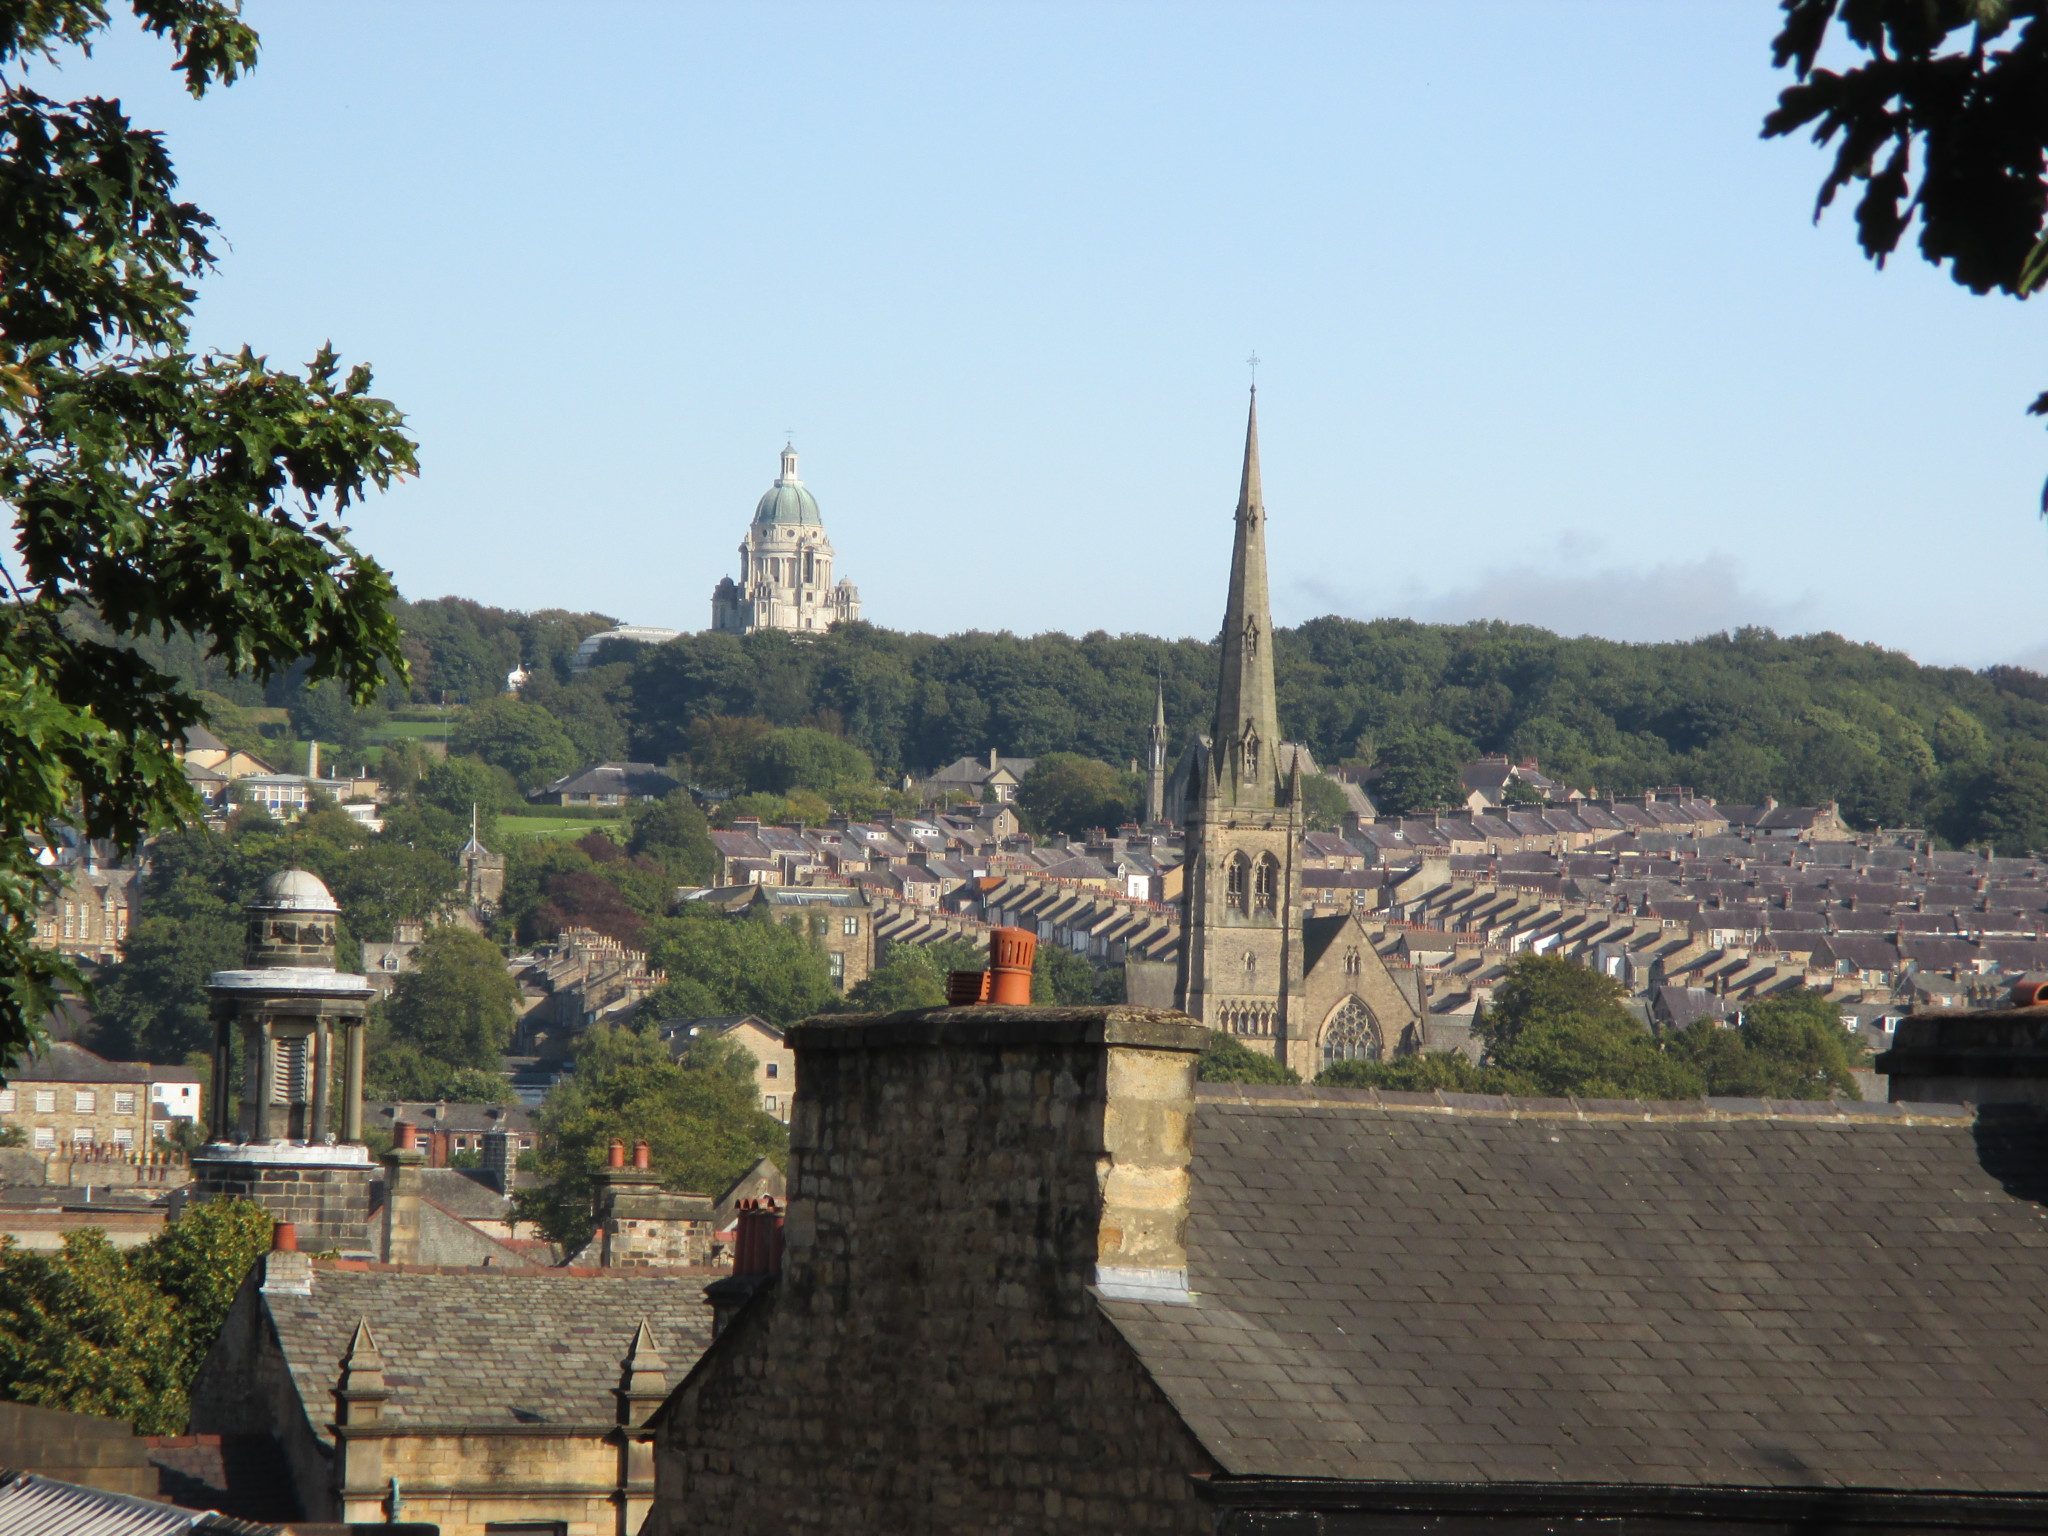 The picturesque town of lancaster.